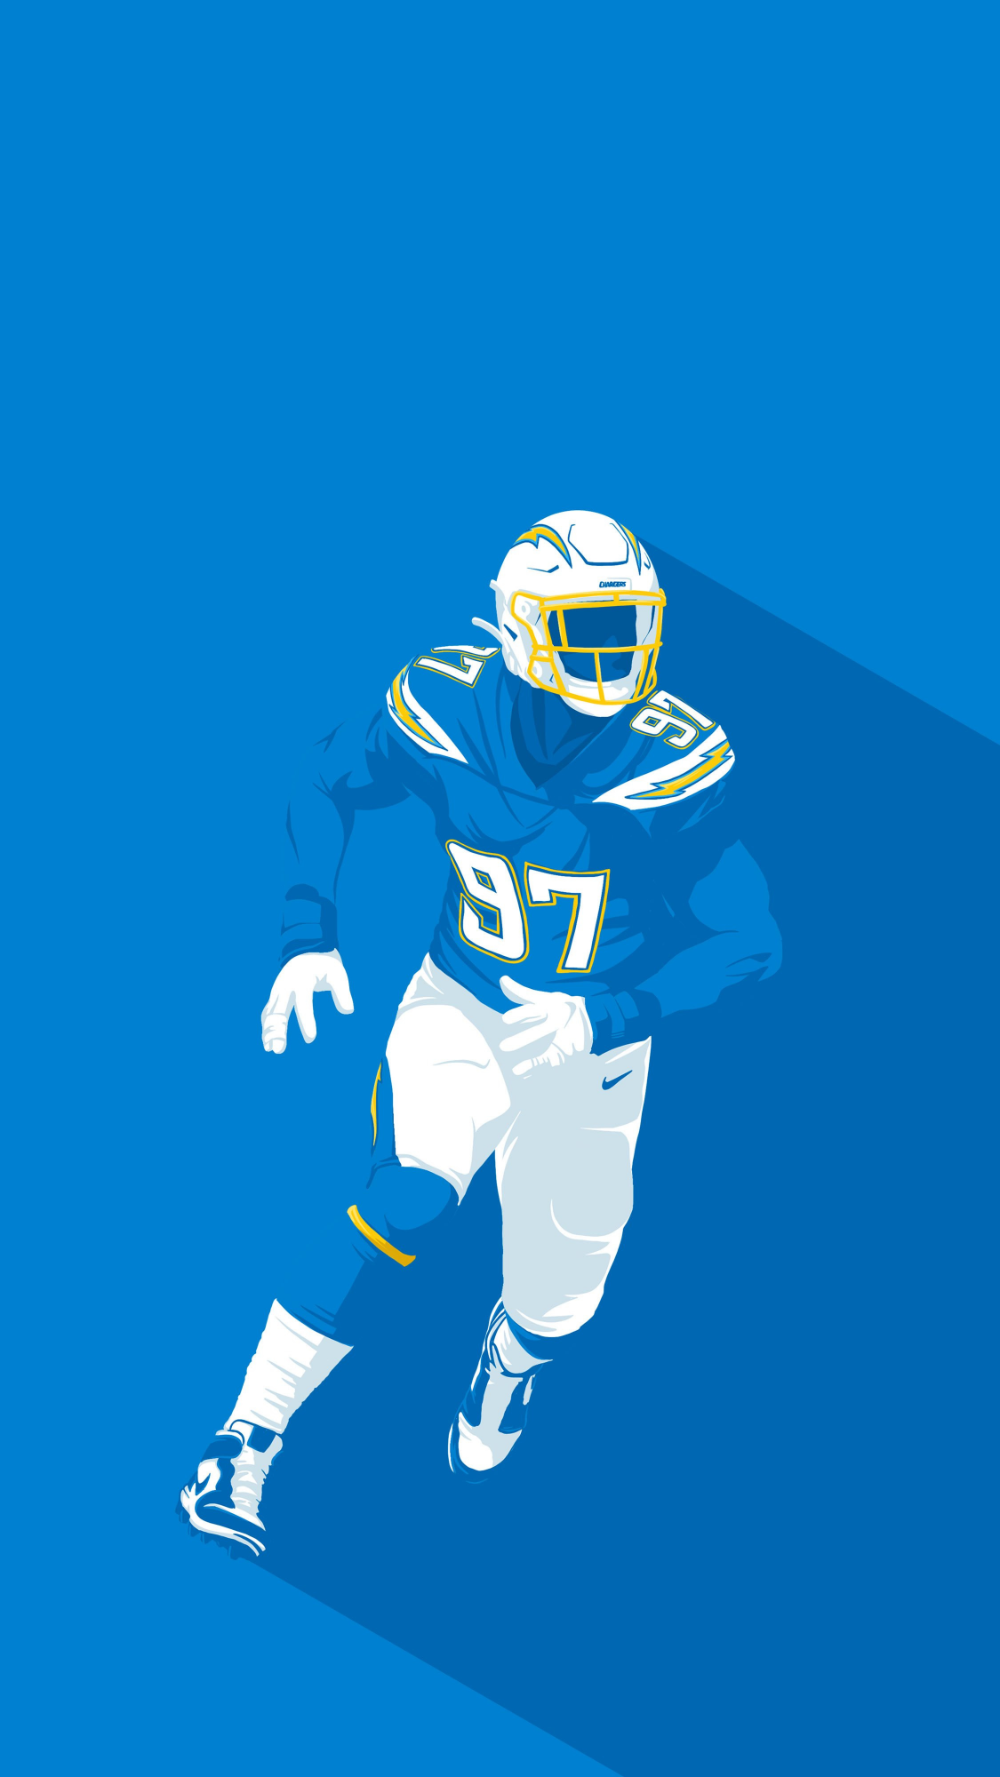 Chargers Wallpaper. Los Angeles Chargers.com. Nfl football wallpaper, Nfl football art, Football illustration